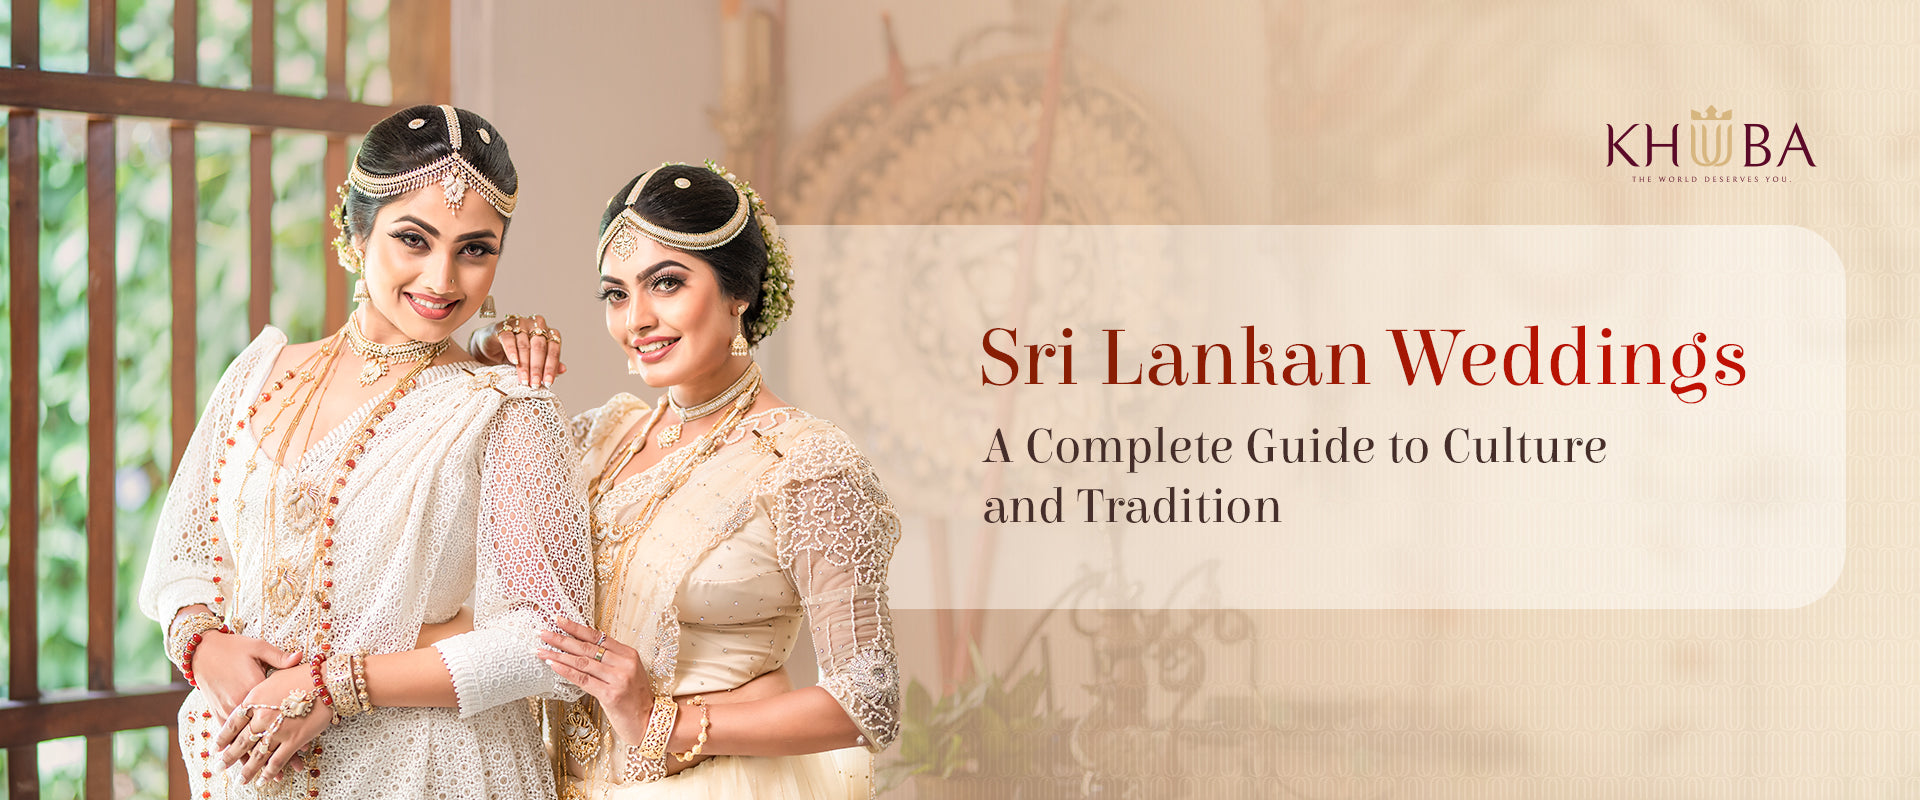 Sri Lankan Weddings: A Complete Guide to Culture and Tradition